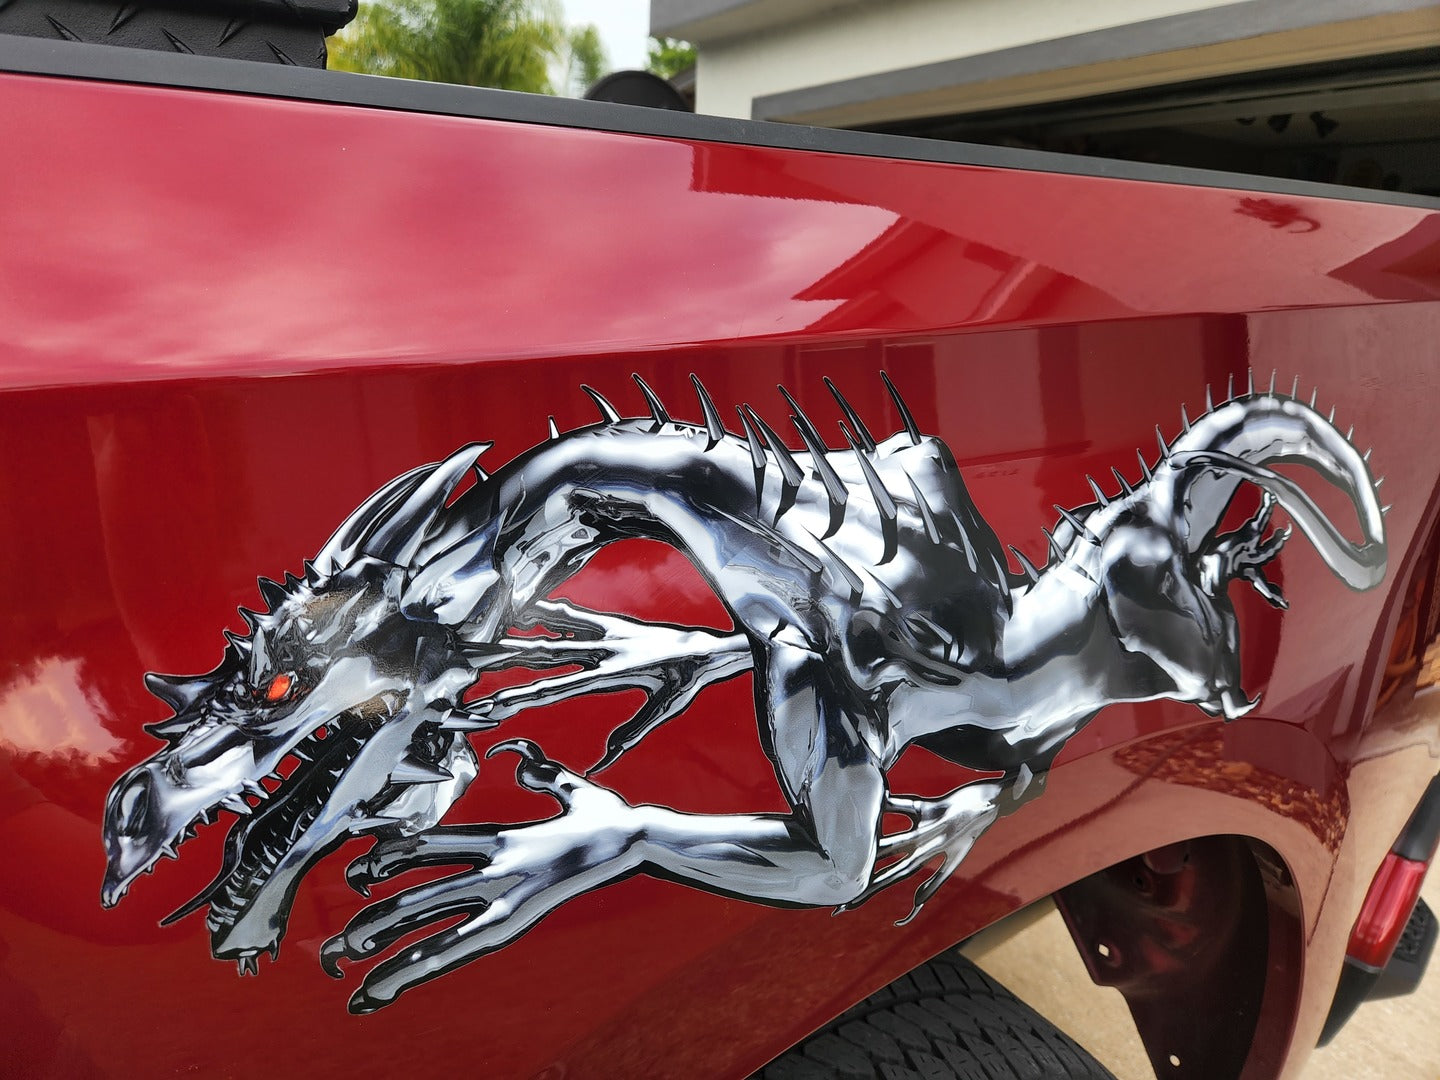 chrome color dragon decal on the side of a red truck